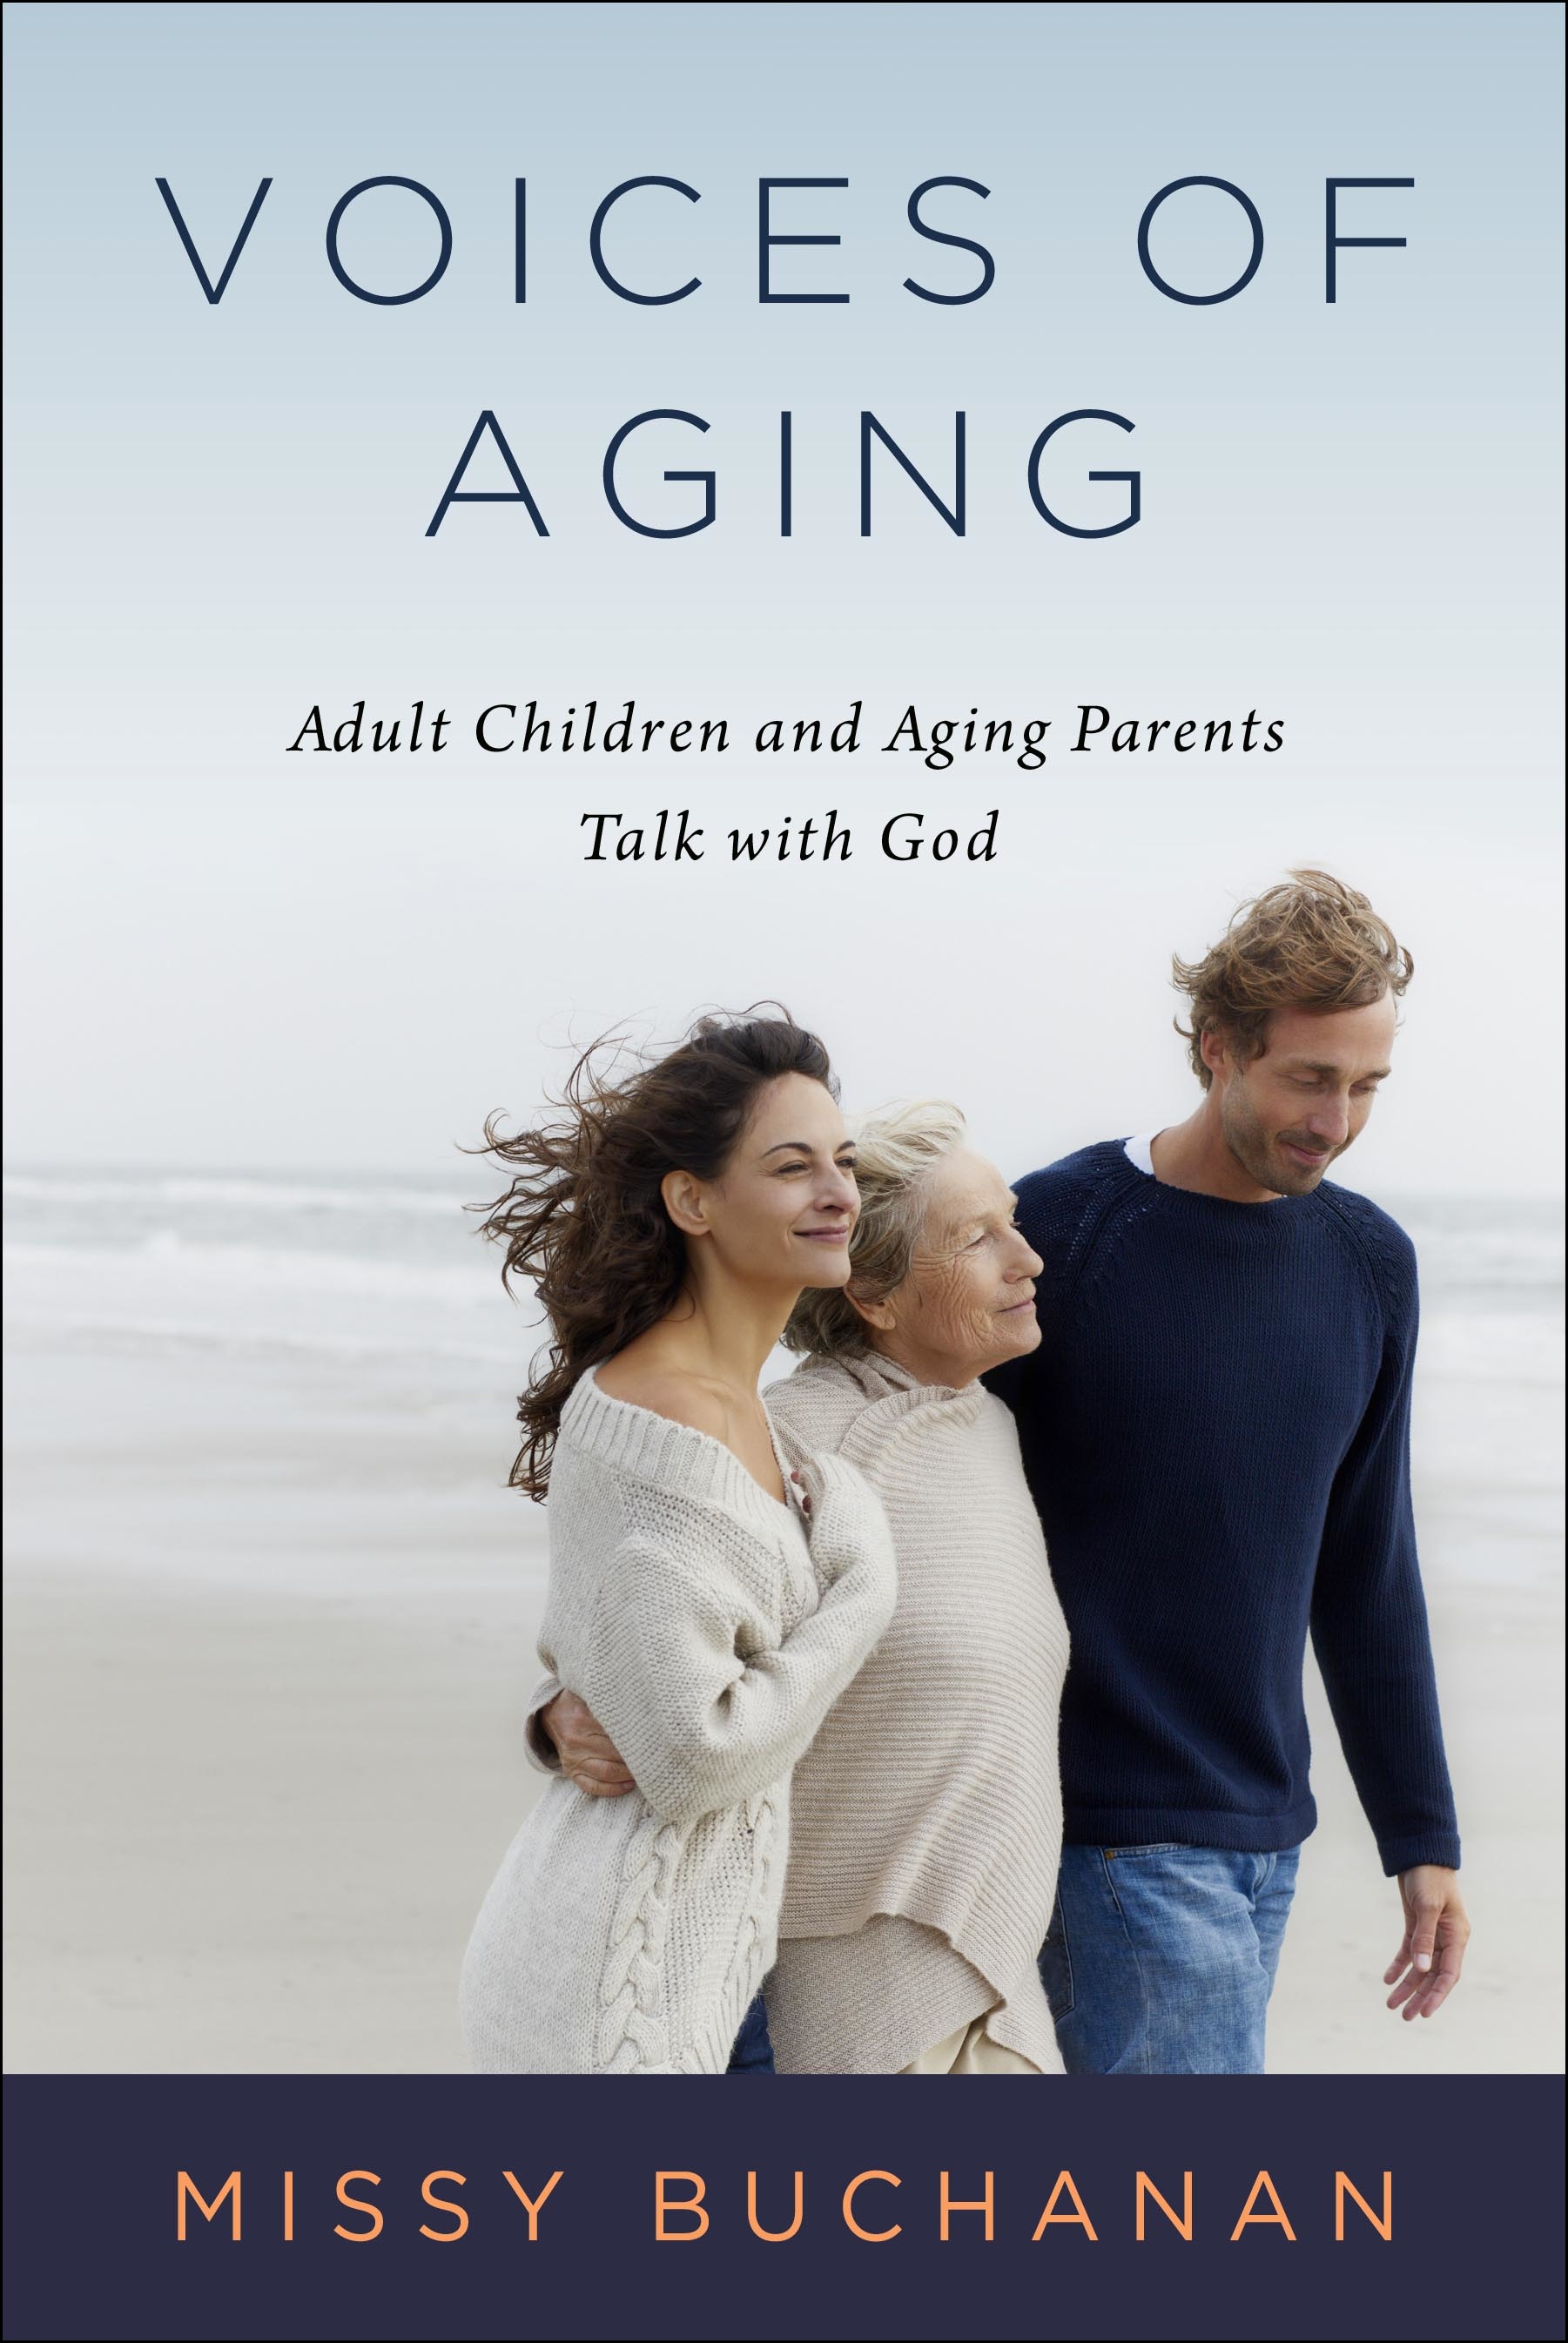 Missy Buchanan's 20 meditations in "Voices of Aging" provide insight into the feelings of two generations as they struggle with the fears and frustrations of aging.